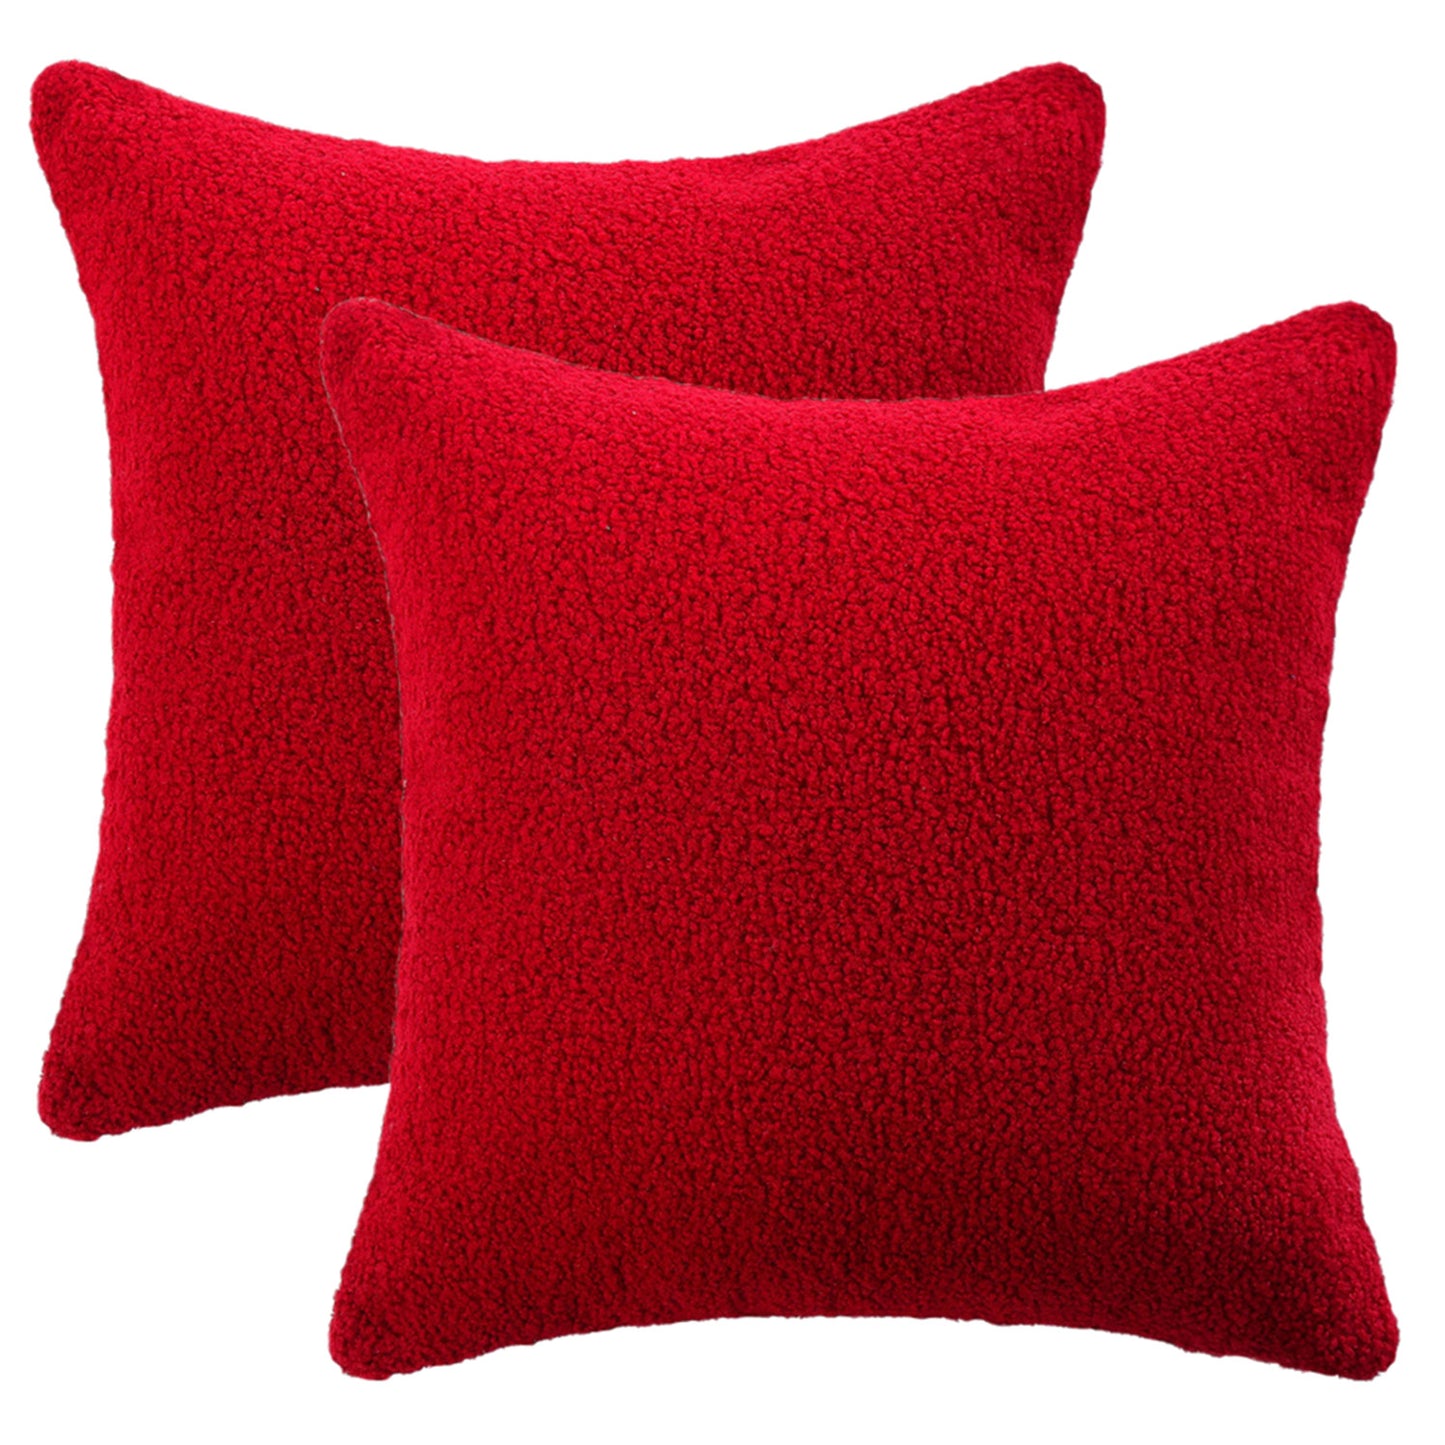 Plush Pillow Covers,Pack of 2, 18x18 inch Solid and Square for Bedroom